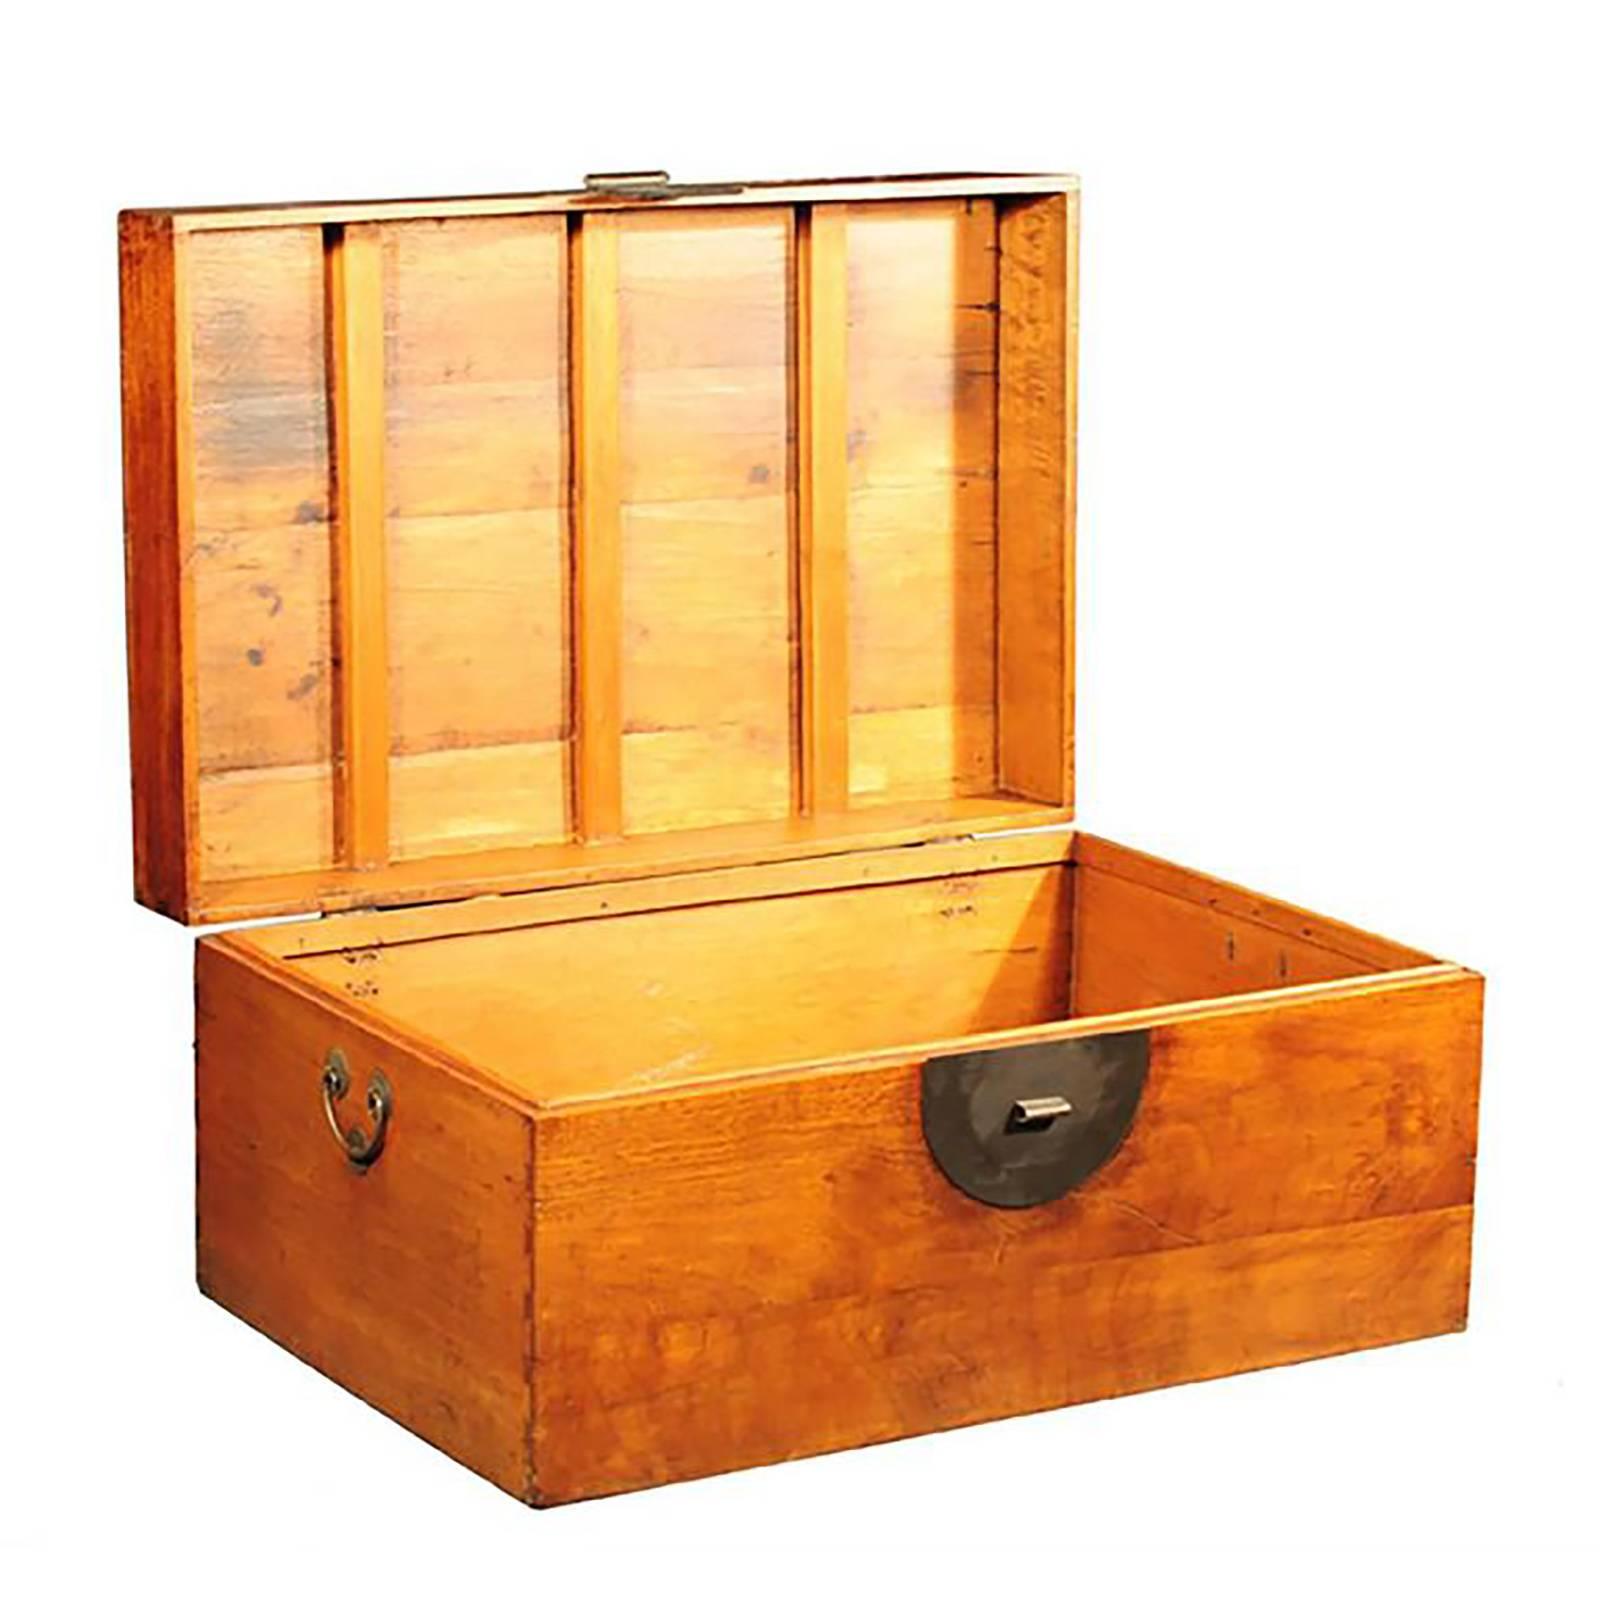 Long ago, a Chinese scholar would have used this trunk to hold and transport heavy books or piles of important manuscripts. Solidly built with a great deal of care, the trunk is constructed out of camphor wood with a polished finish that gives the